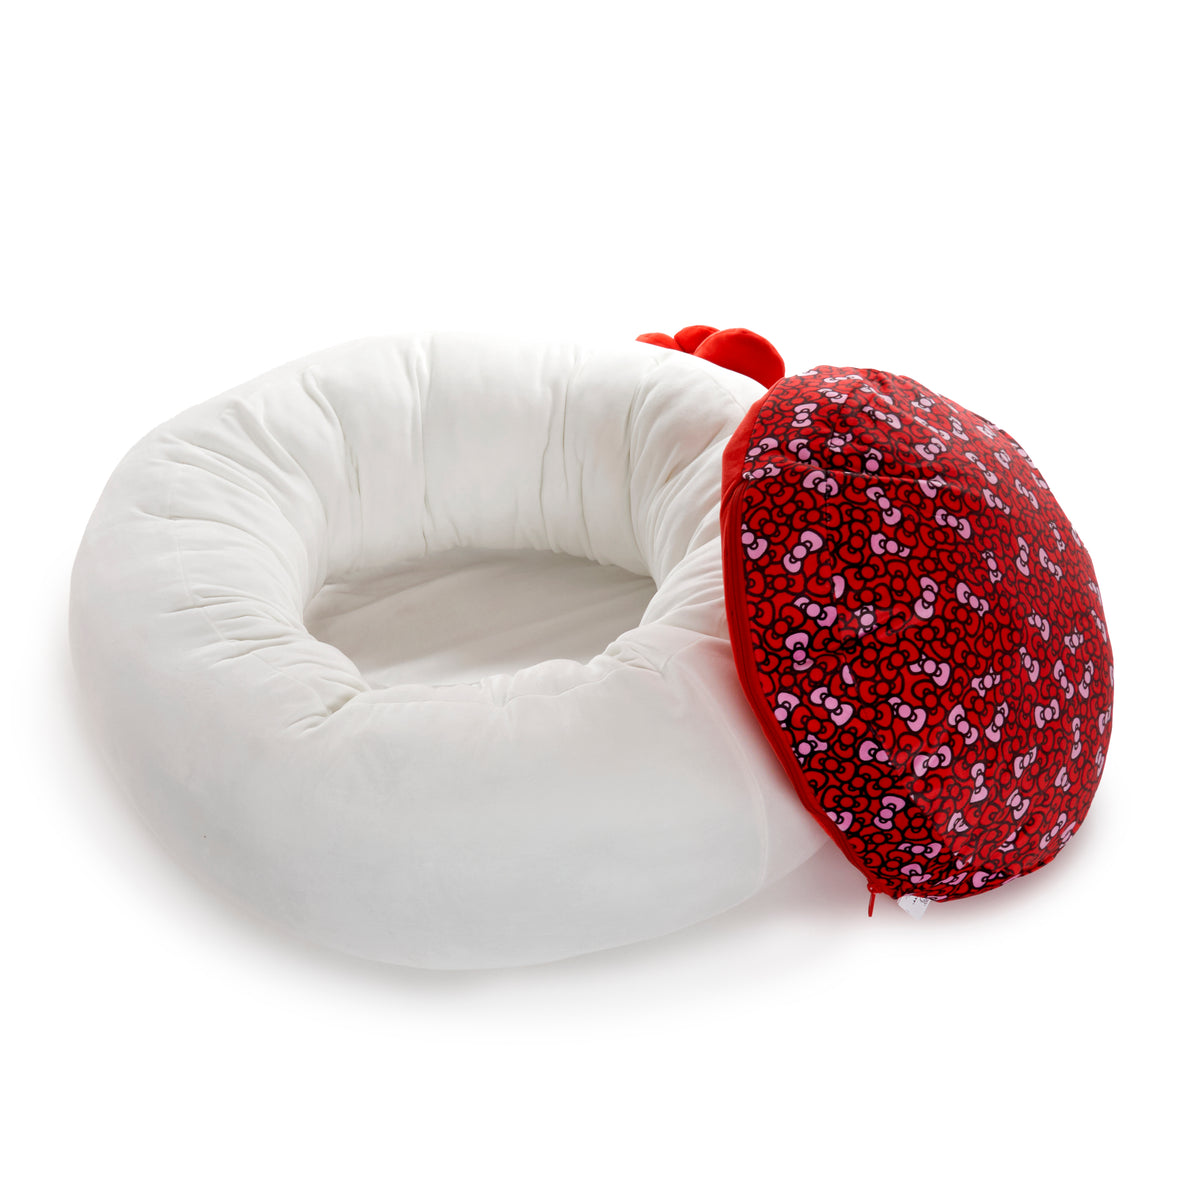 Hello Kitty Classic Pet Bolster Bed (Large) Home Goods Jazwares LLC   